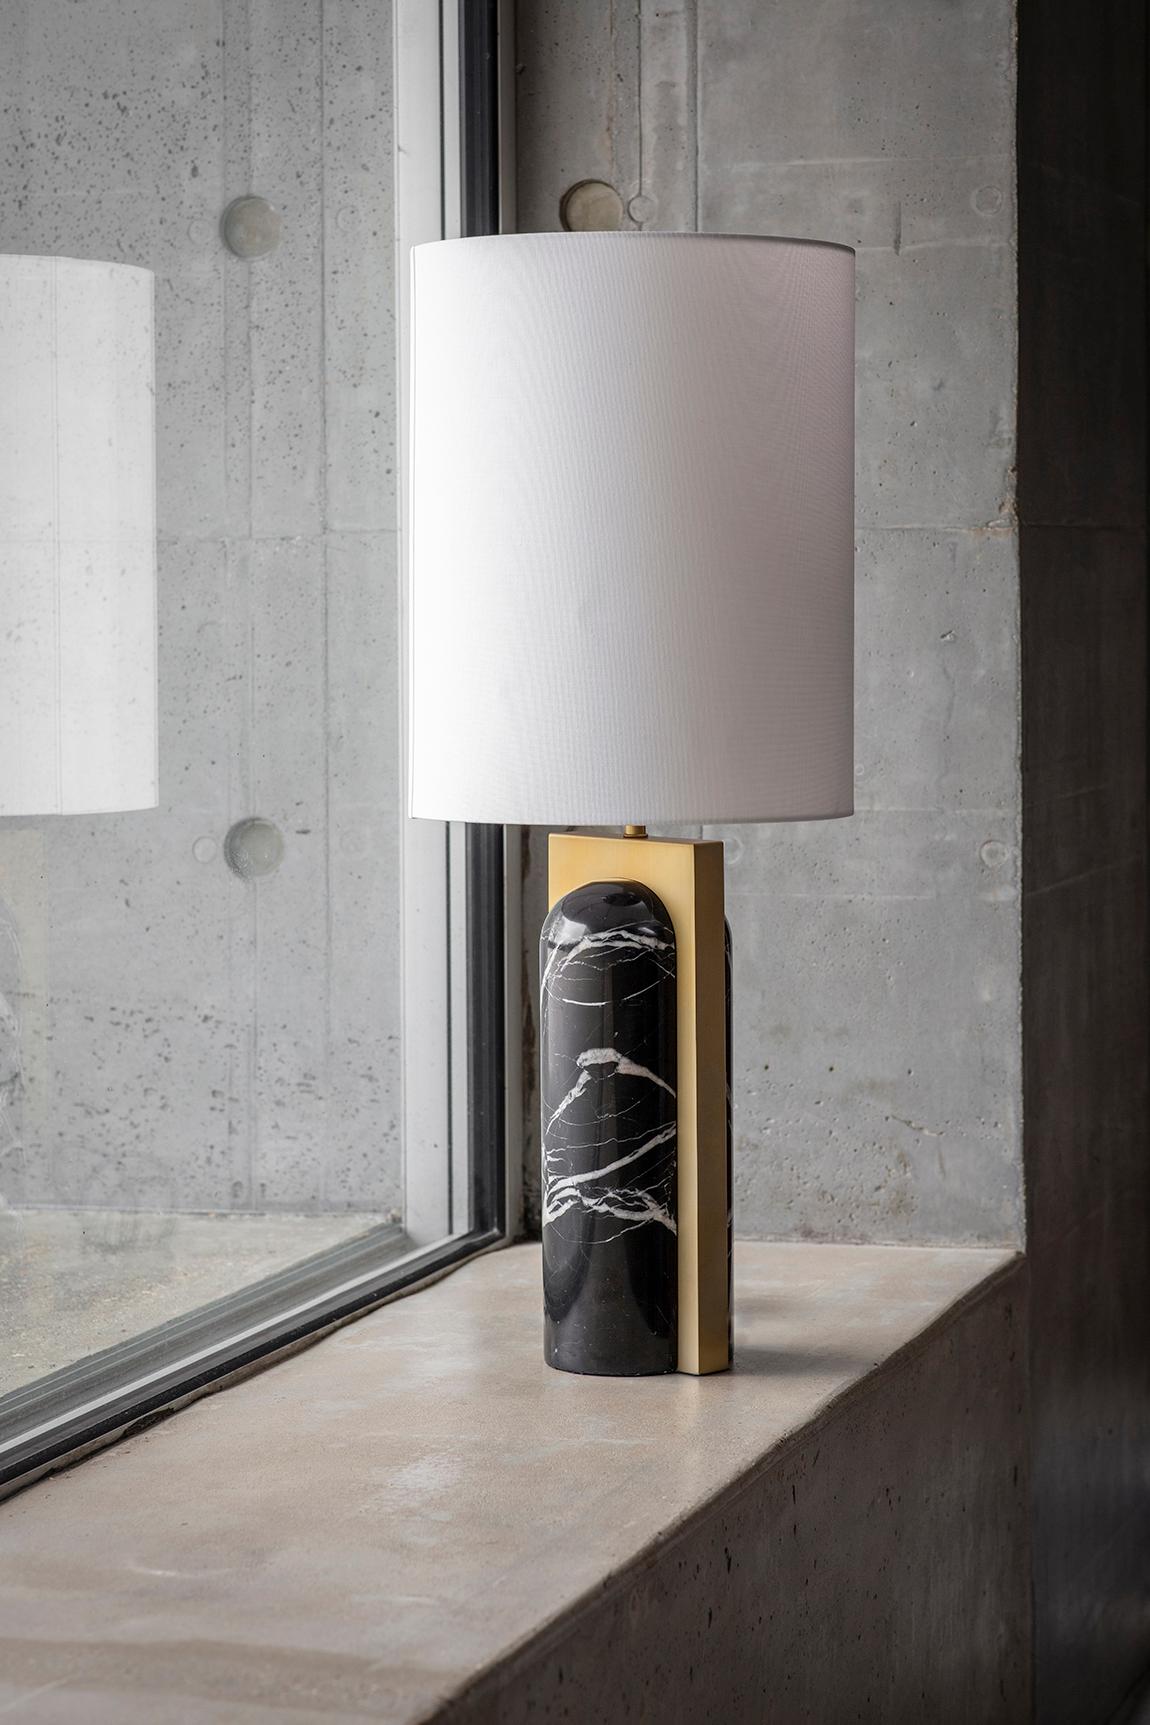 Book Ends Table Lamp by Square in Circle
Dimensions: D35 x H84 cm
Materials: Brushed brass/ black marble/ white cotton shade
Other finishes available.

The refined contemporary style of this table lamp is crafted from a tapered and rounded black